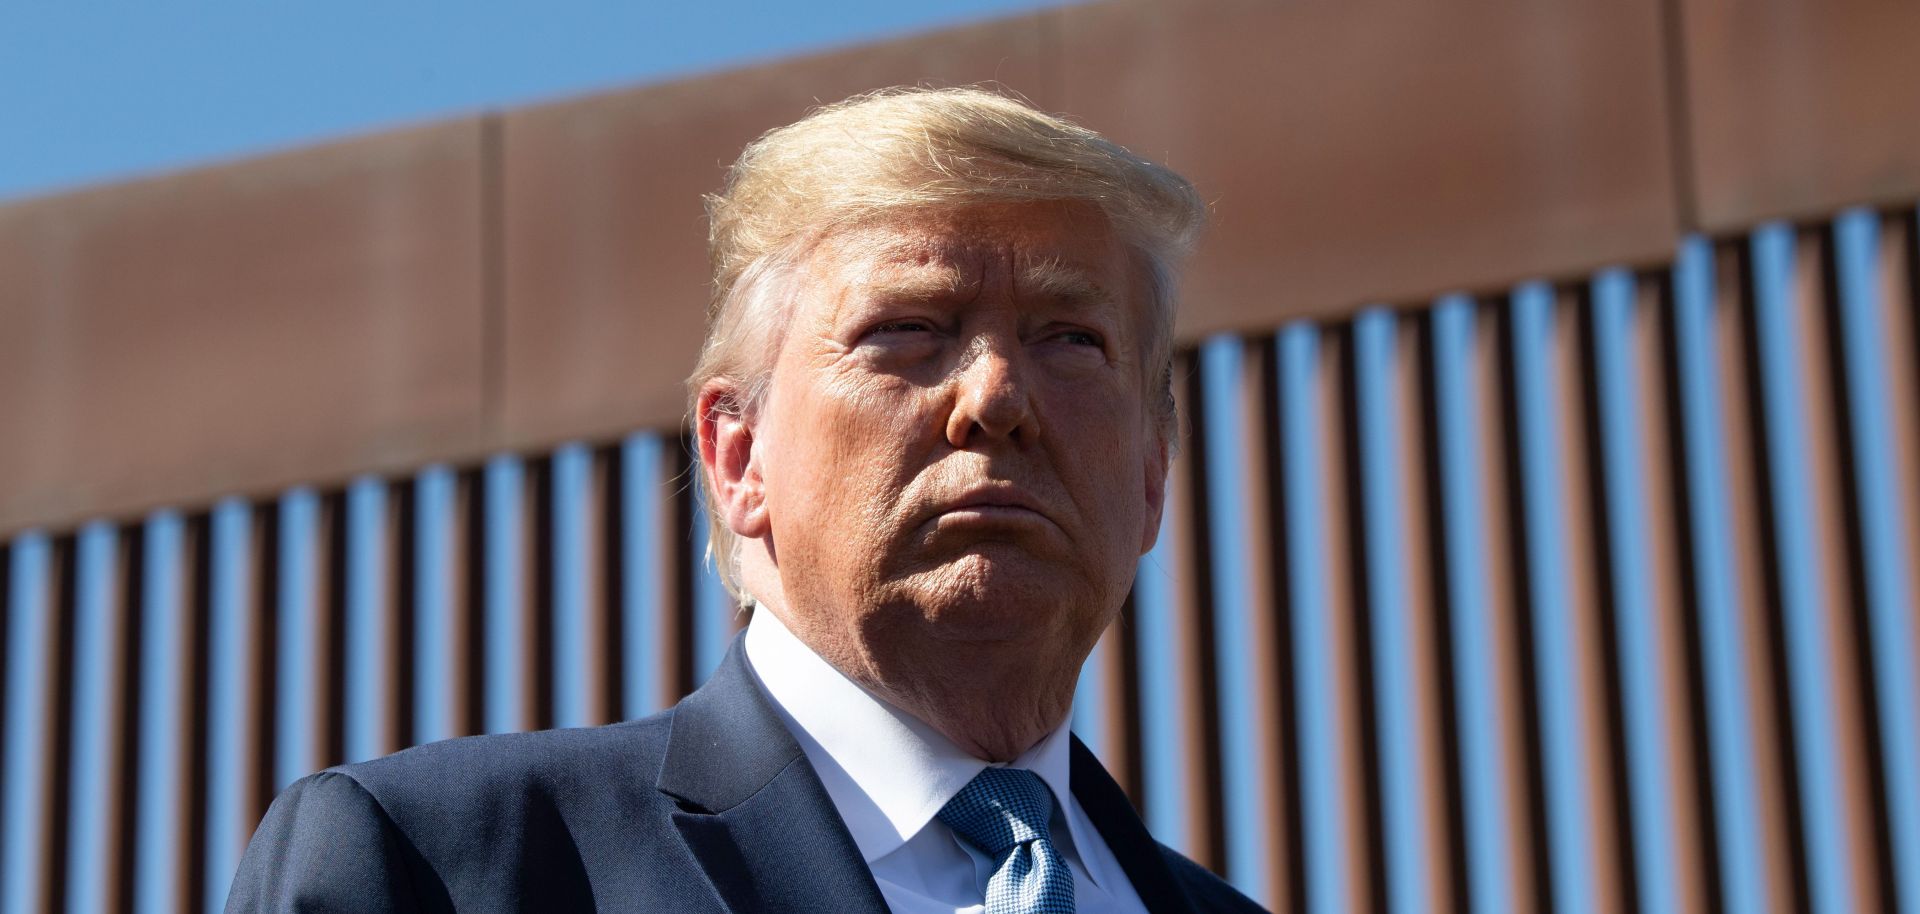 U.S. President Donald Trump visits the U.S.-Mexico border fence in Otay Mesa, California, on Sept. 18, 2019.